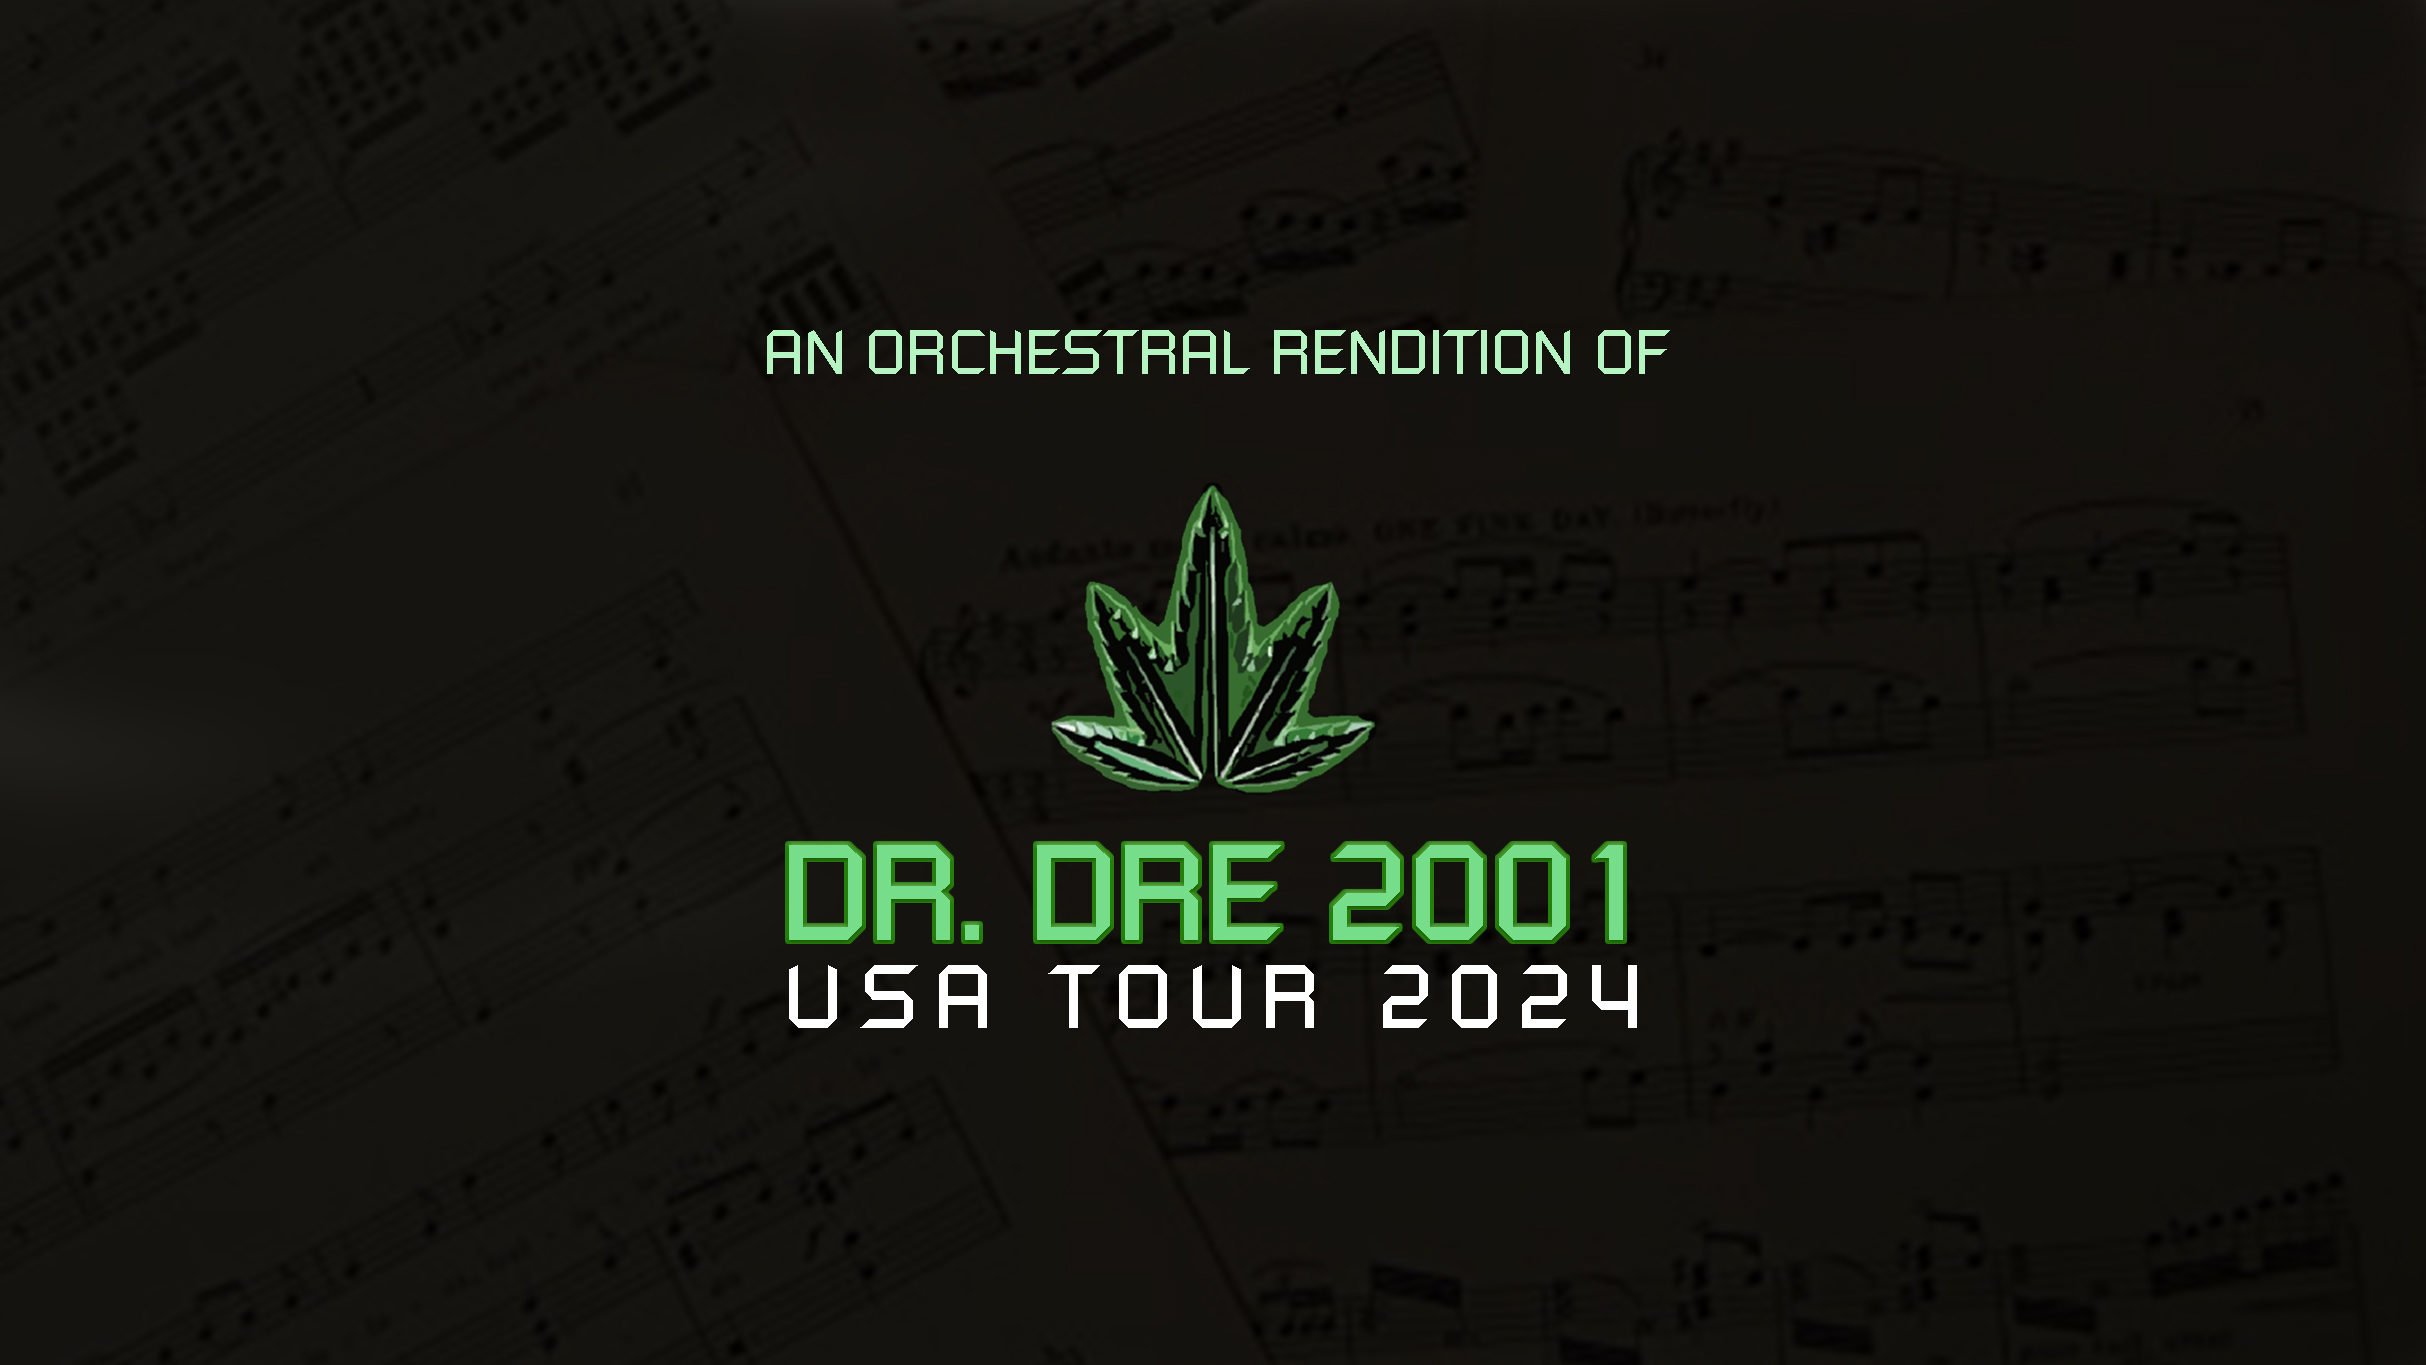 ORCHESTRAL RENDITION OF DR. DRE: 2001 - BROOKLYN